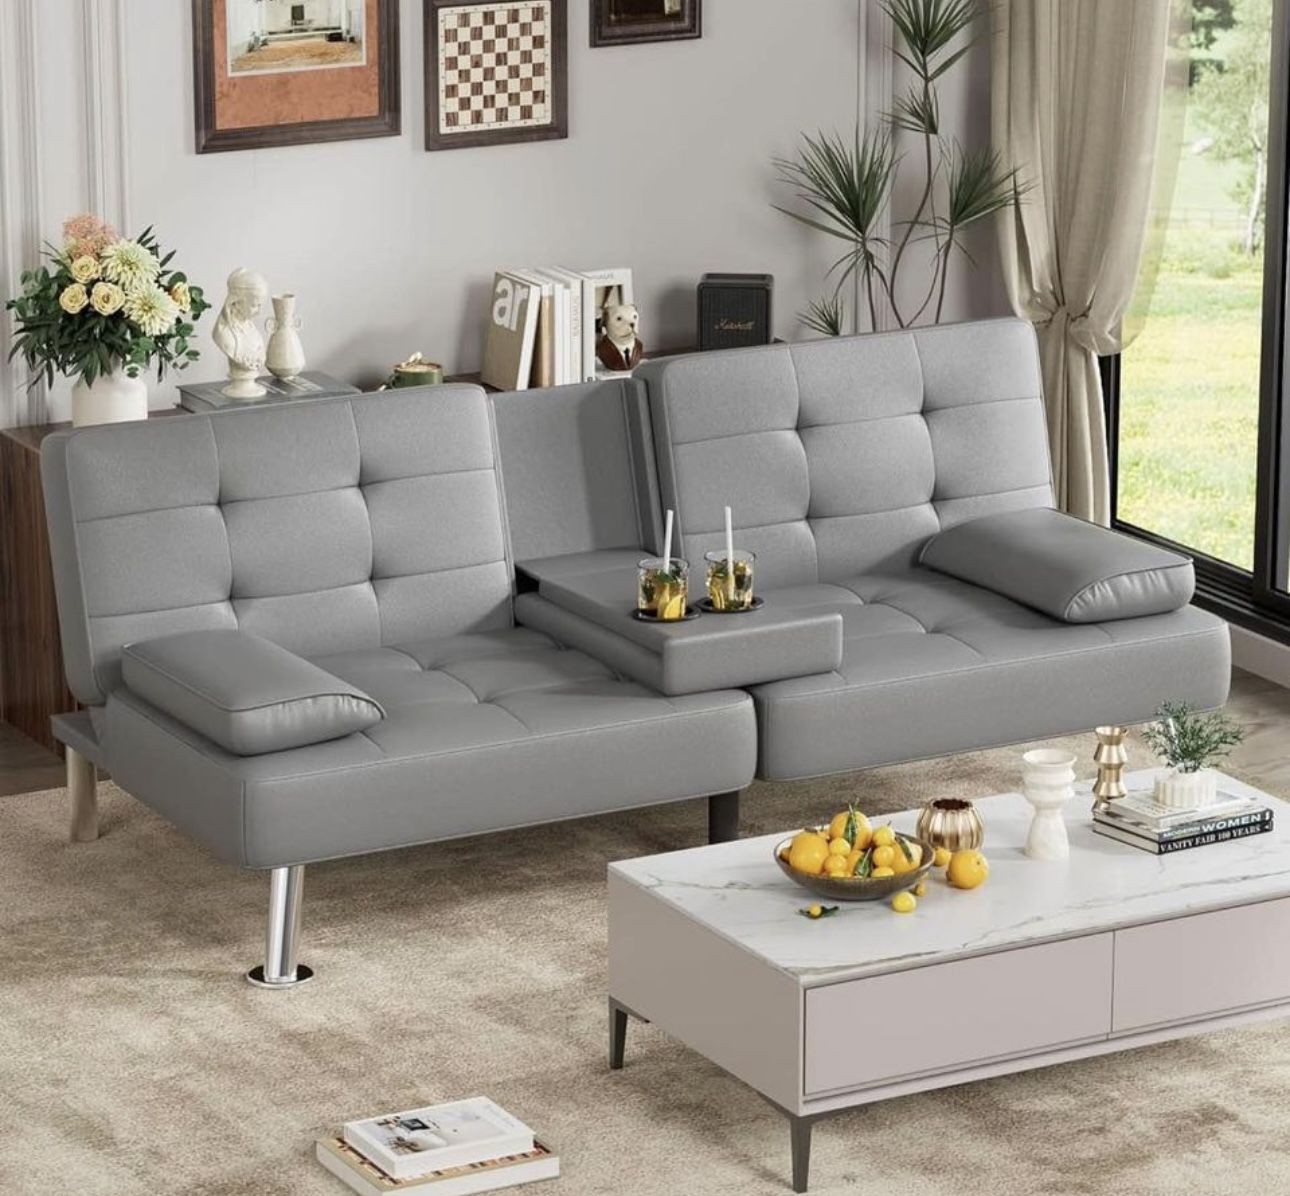 Grey color Faux Leather Upholstered Convertible Folding Futon Sofa Bed 2 Cupholders